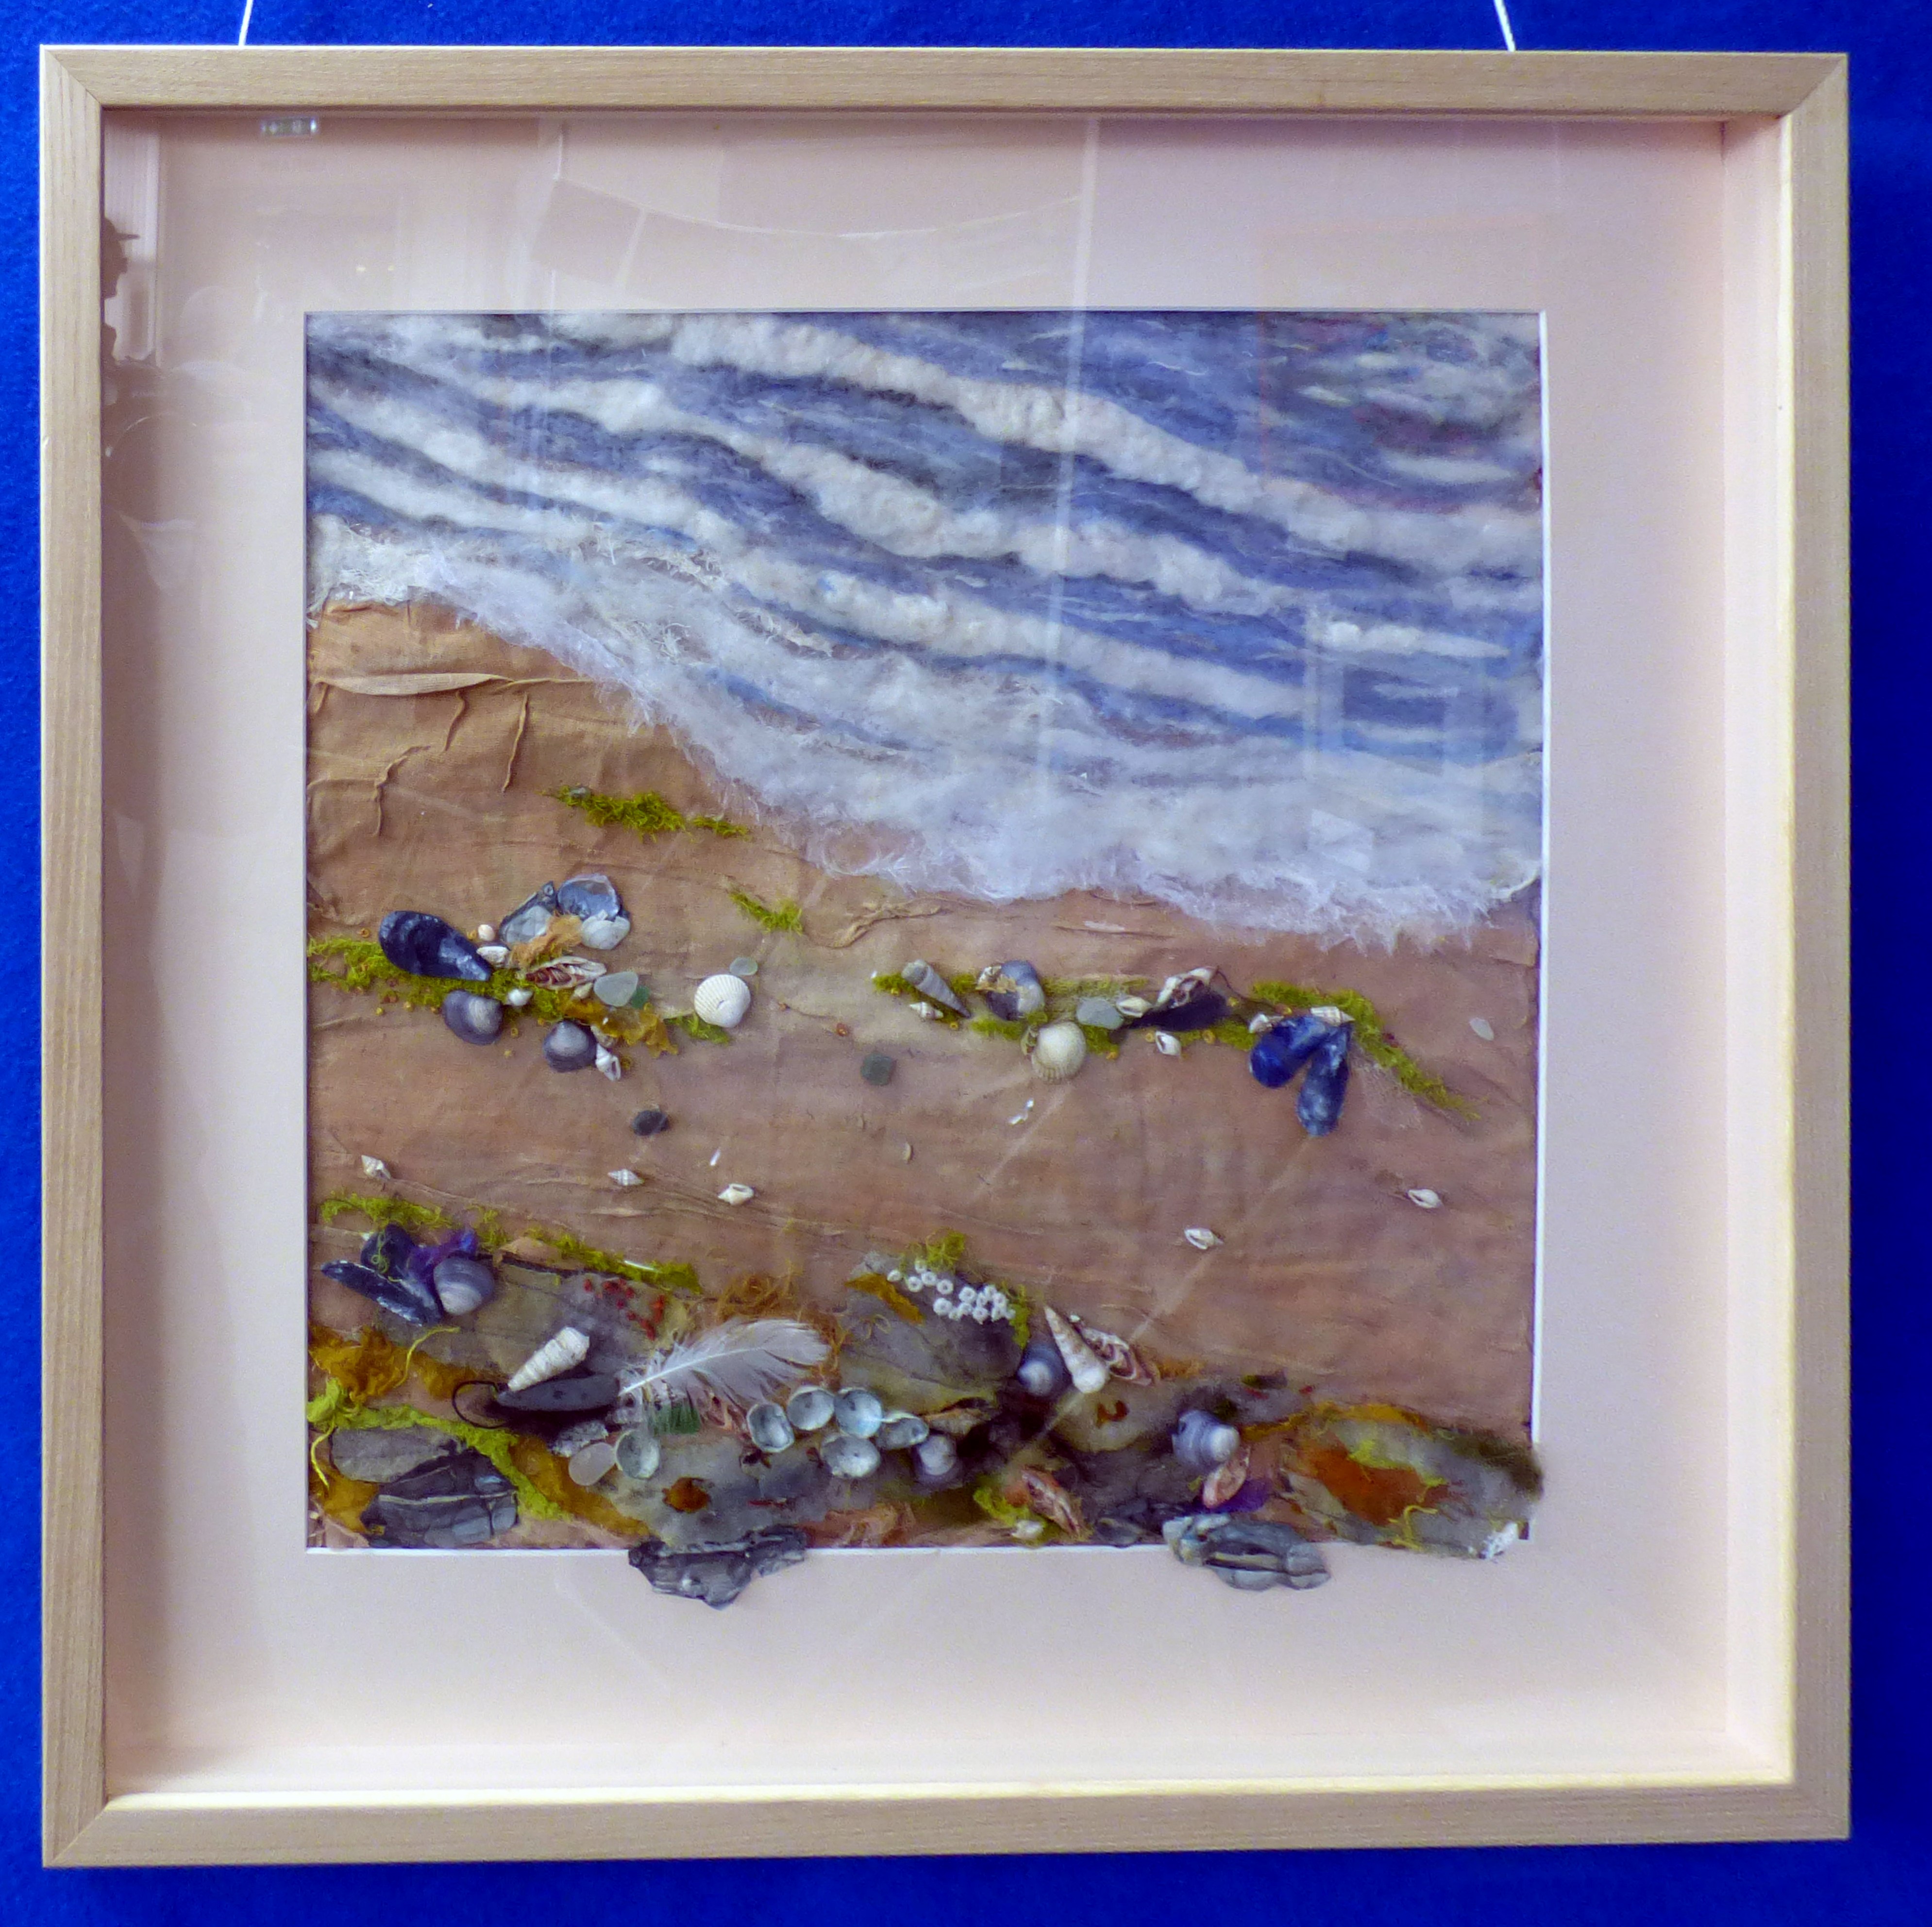 AFTER THE TIDE by Kathy Hoolihan, H2O exhibition by ConText 2019